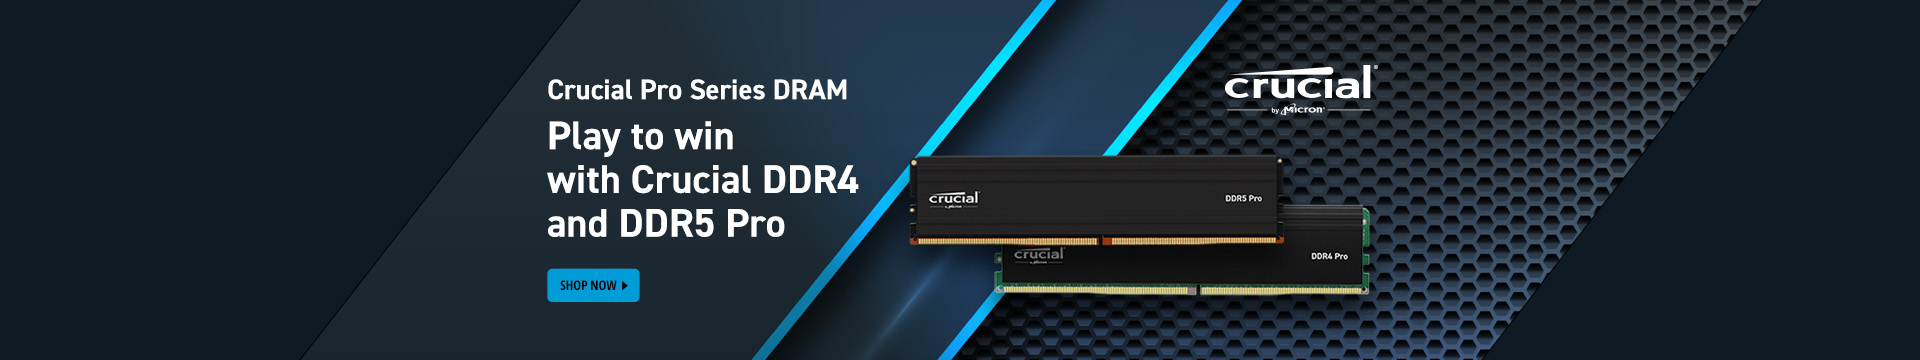 Play to win with crucial DDR4 and DDR5 pro